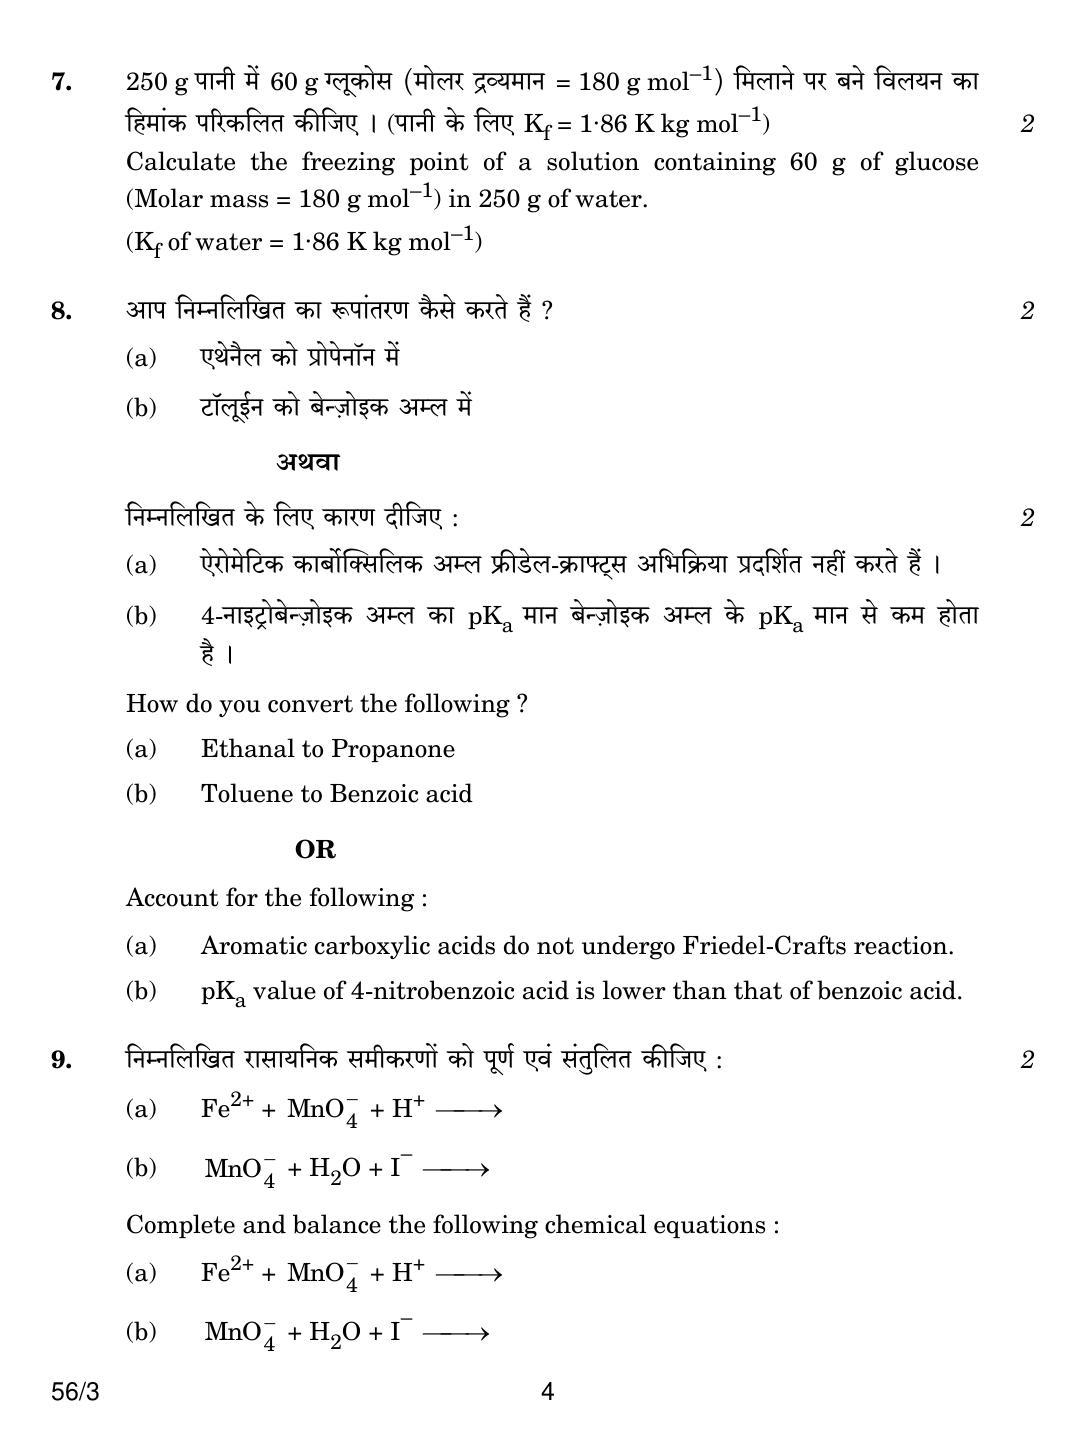 CBSE Class 12 56-3 CHEMISTRY 2018 Question Paper - Page 4